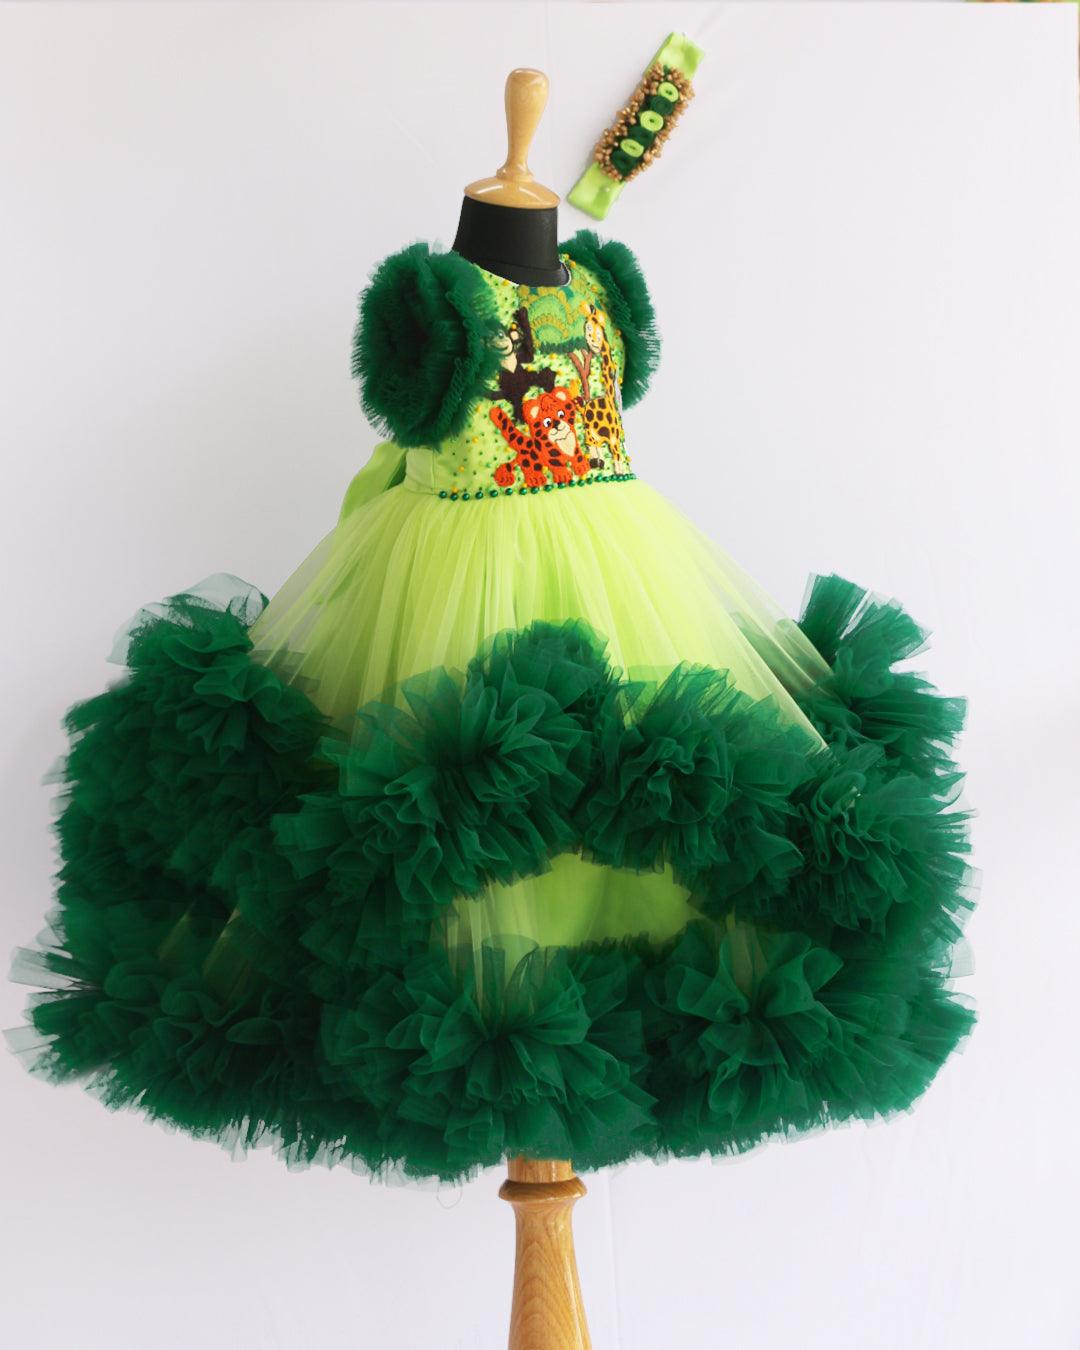 Lime Green & Dark green Animal Theme Jungle Frock
Material: Lime Green &amp; Dark Green Animal Theme Jungle Frock is made with soft nylon mono net with two layered and ruffles on each end portion. Yoke portion is d